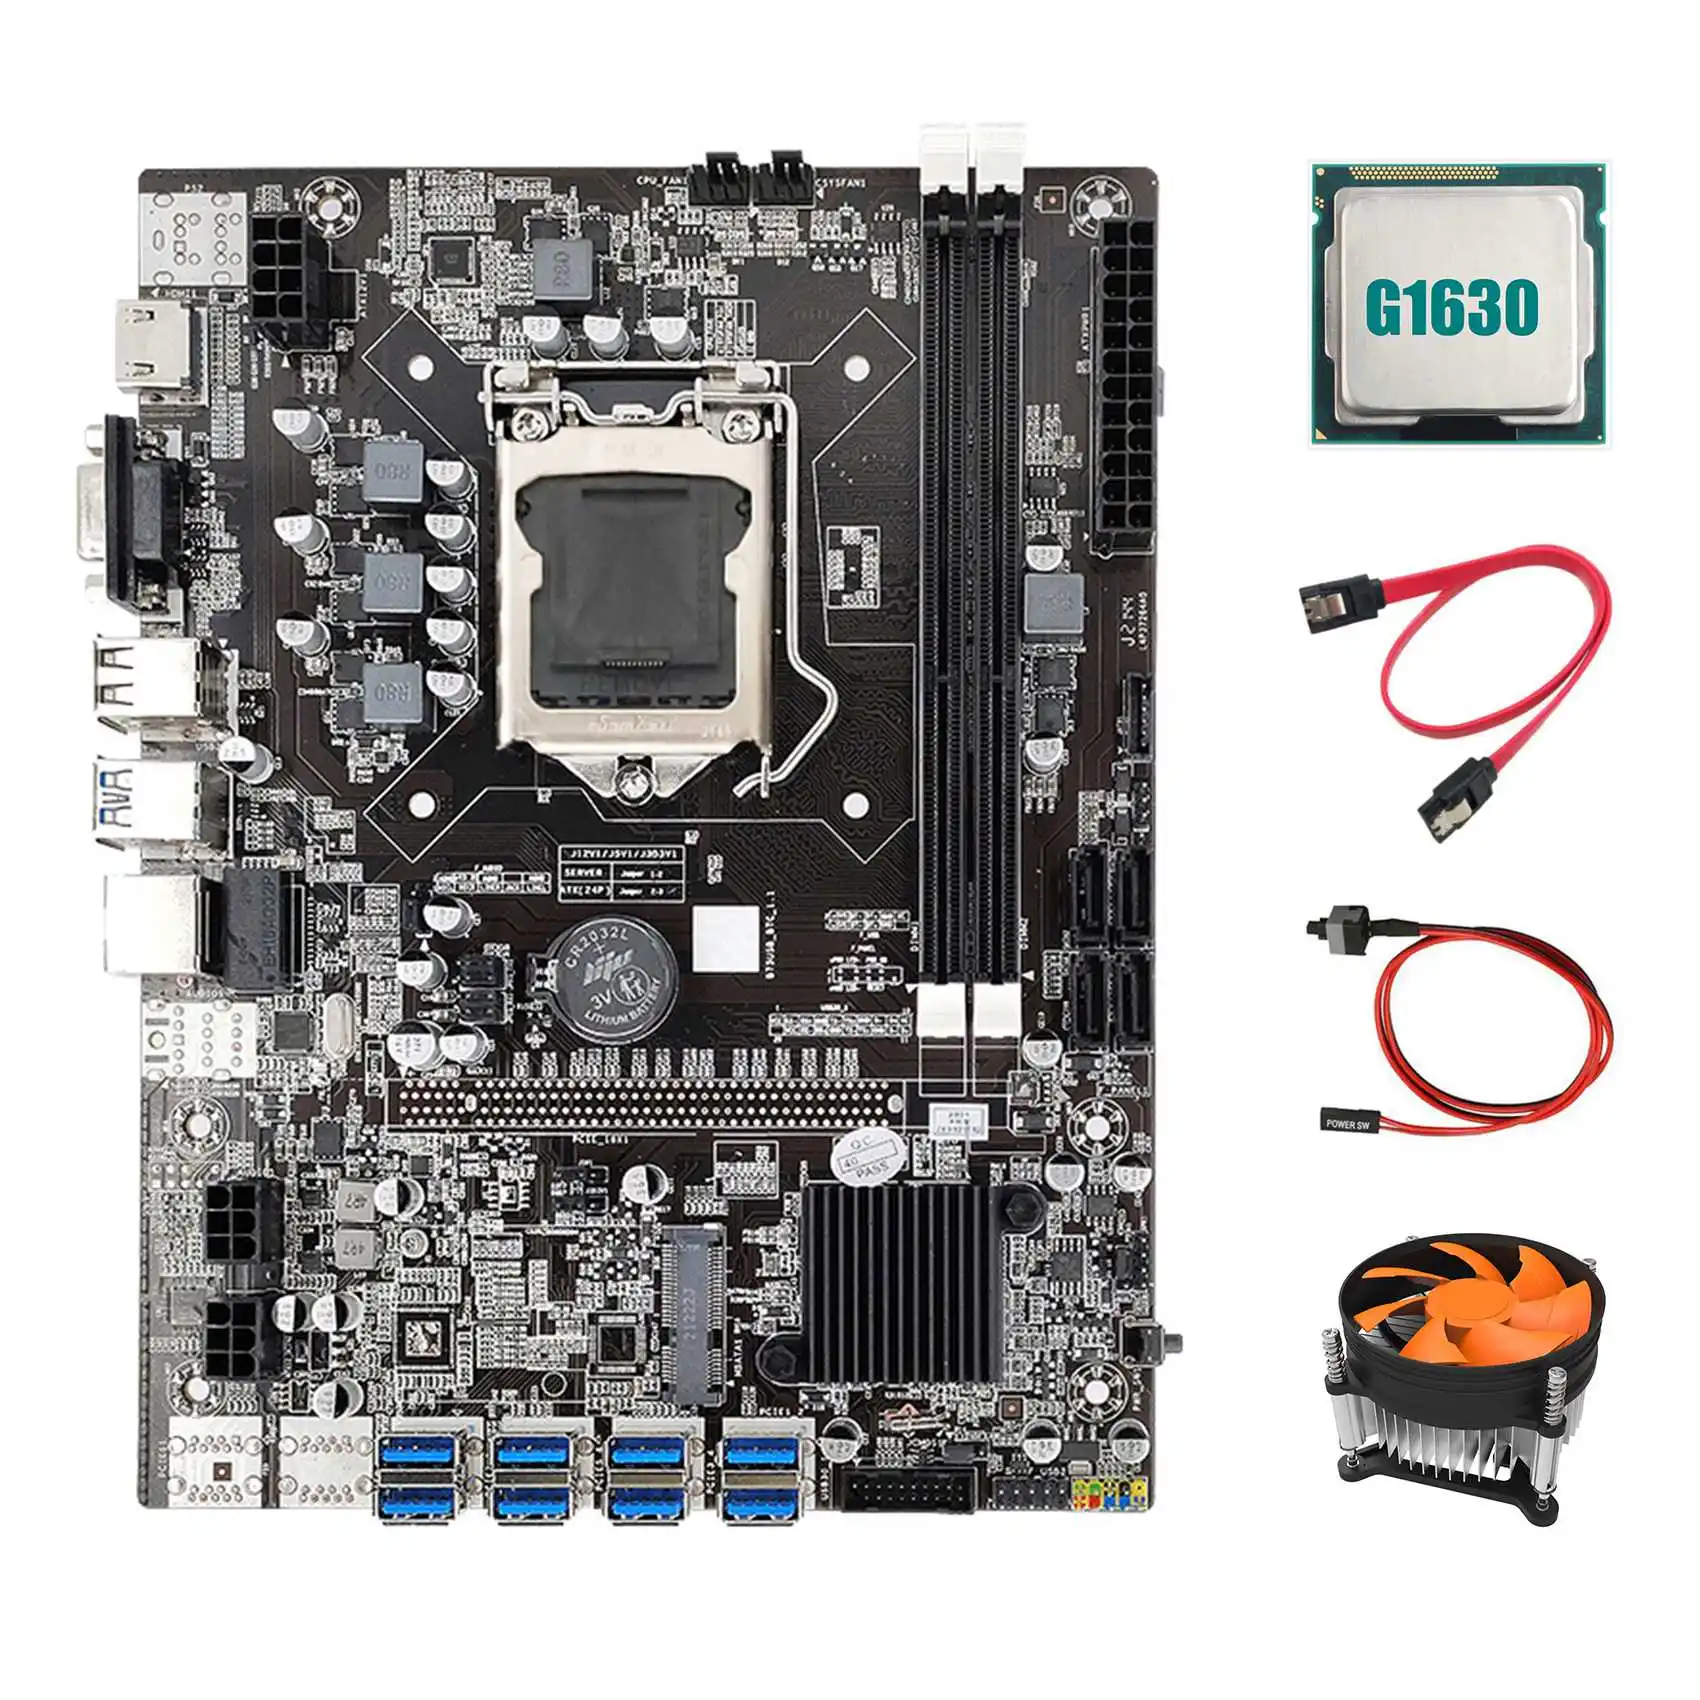 B75 ETH Mining Motherboard+G1630 CPU+Fan+SATA Cable+Switch Cable LGA1155 8XPCIE USB Adapter MSATA DDR3 B75 Motherboard